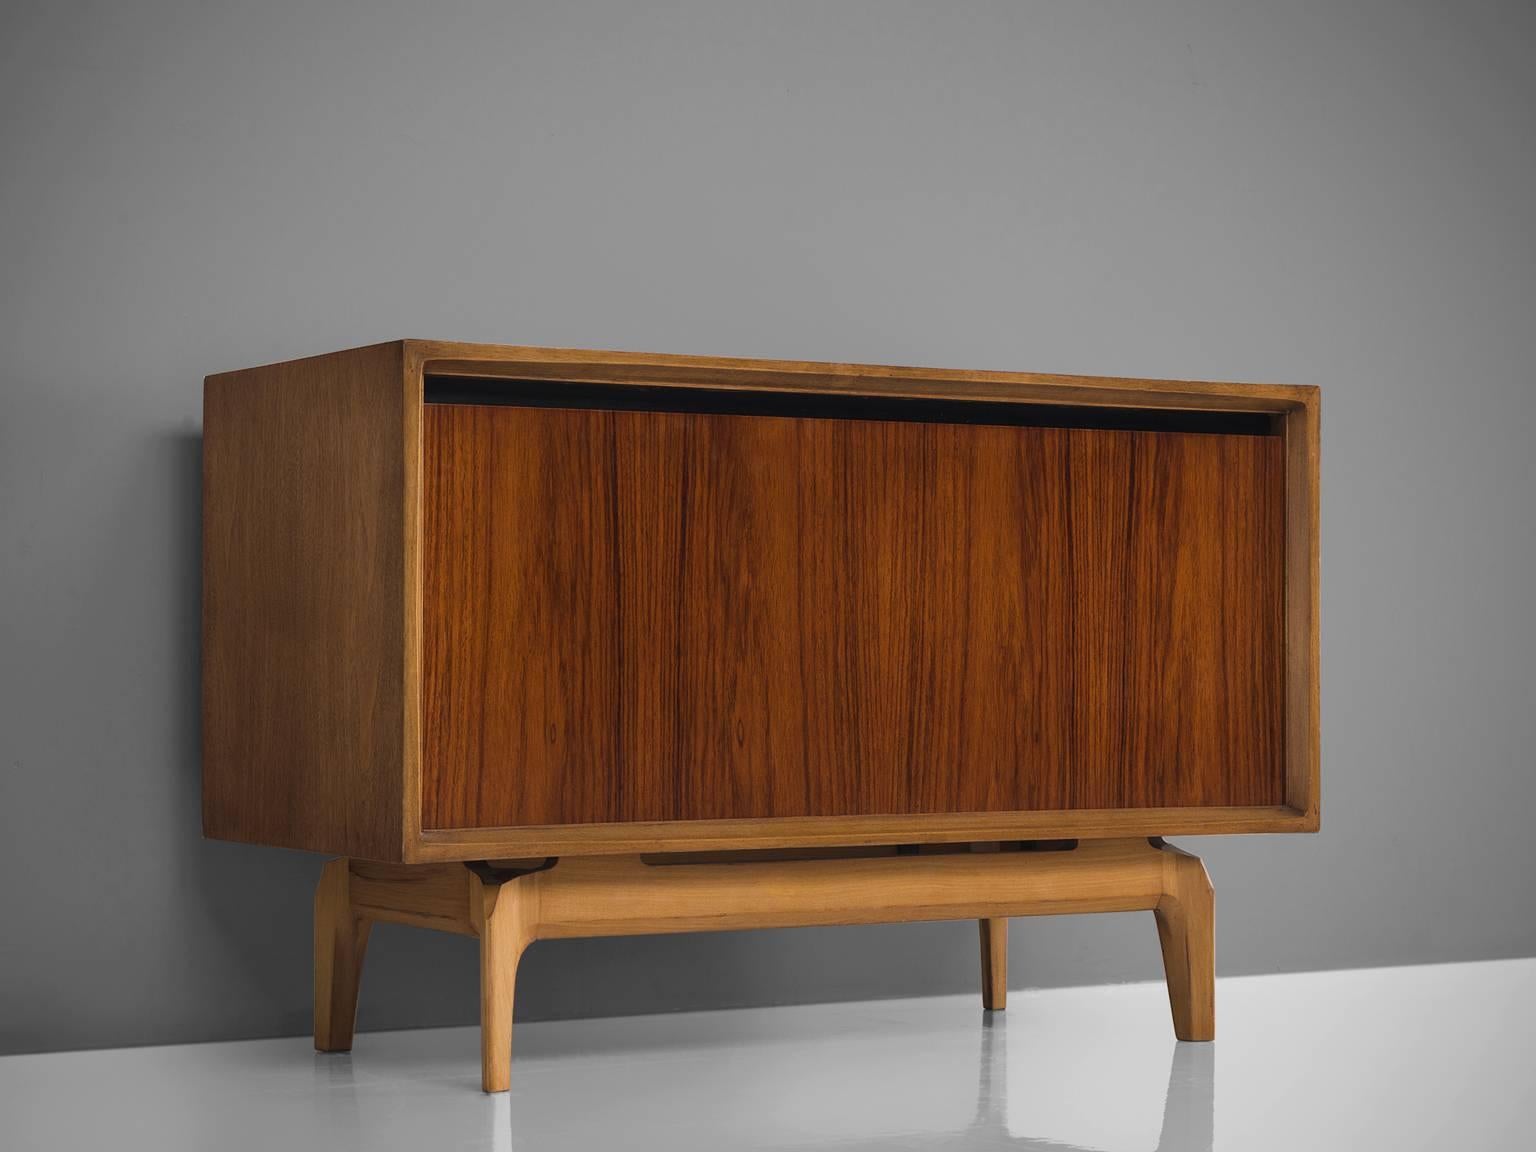 Fred Sandra attributed for De Coene, sideboard, rosewood and walnut, Belgium, 1958.

This sideboard is well-constructed and detailed in a discrete manner. Produced in rosewood and walnut. The piece shows well-designed lines and interesting